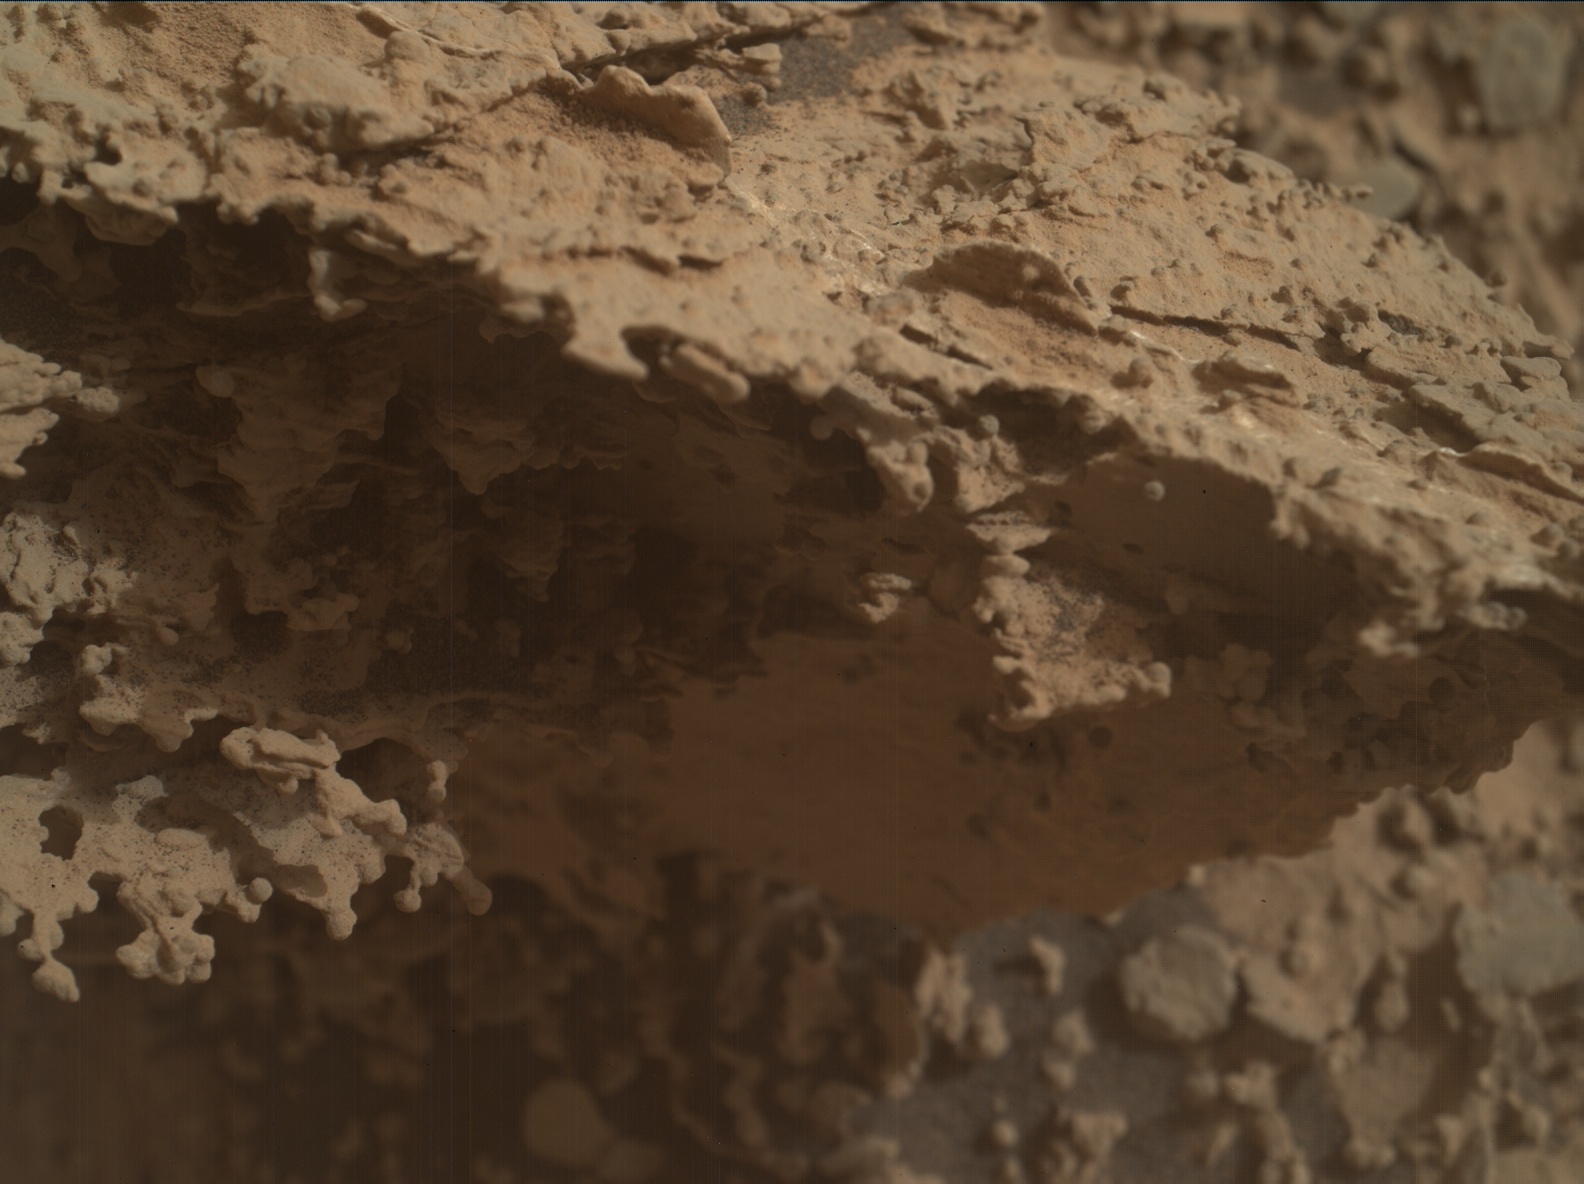 Nasa's Mars rover Curiosity acquired this image using its Mars Hand Lens Imager (MAHLI) on Sol 3508